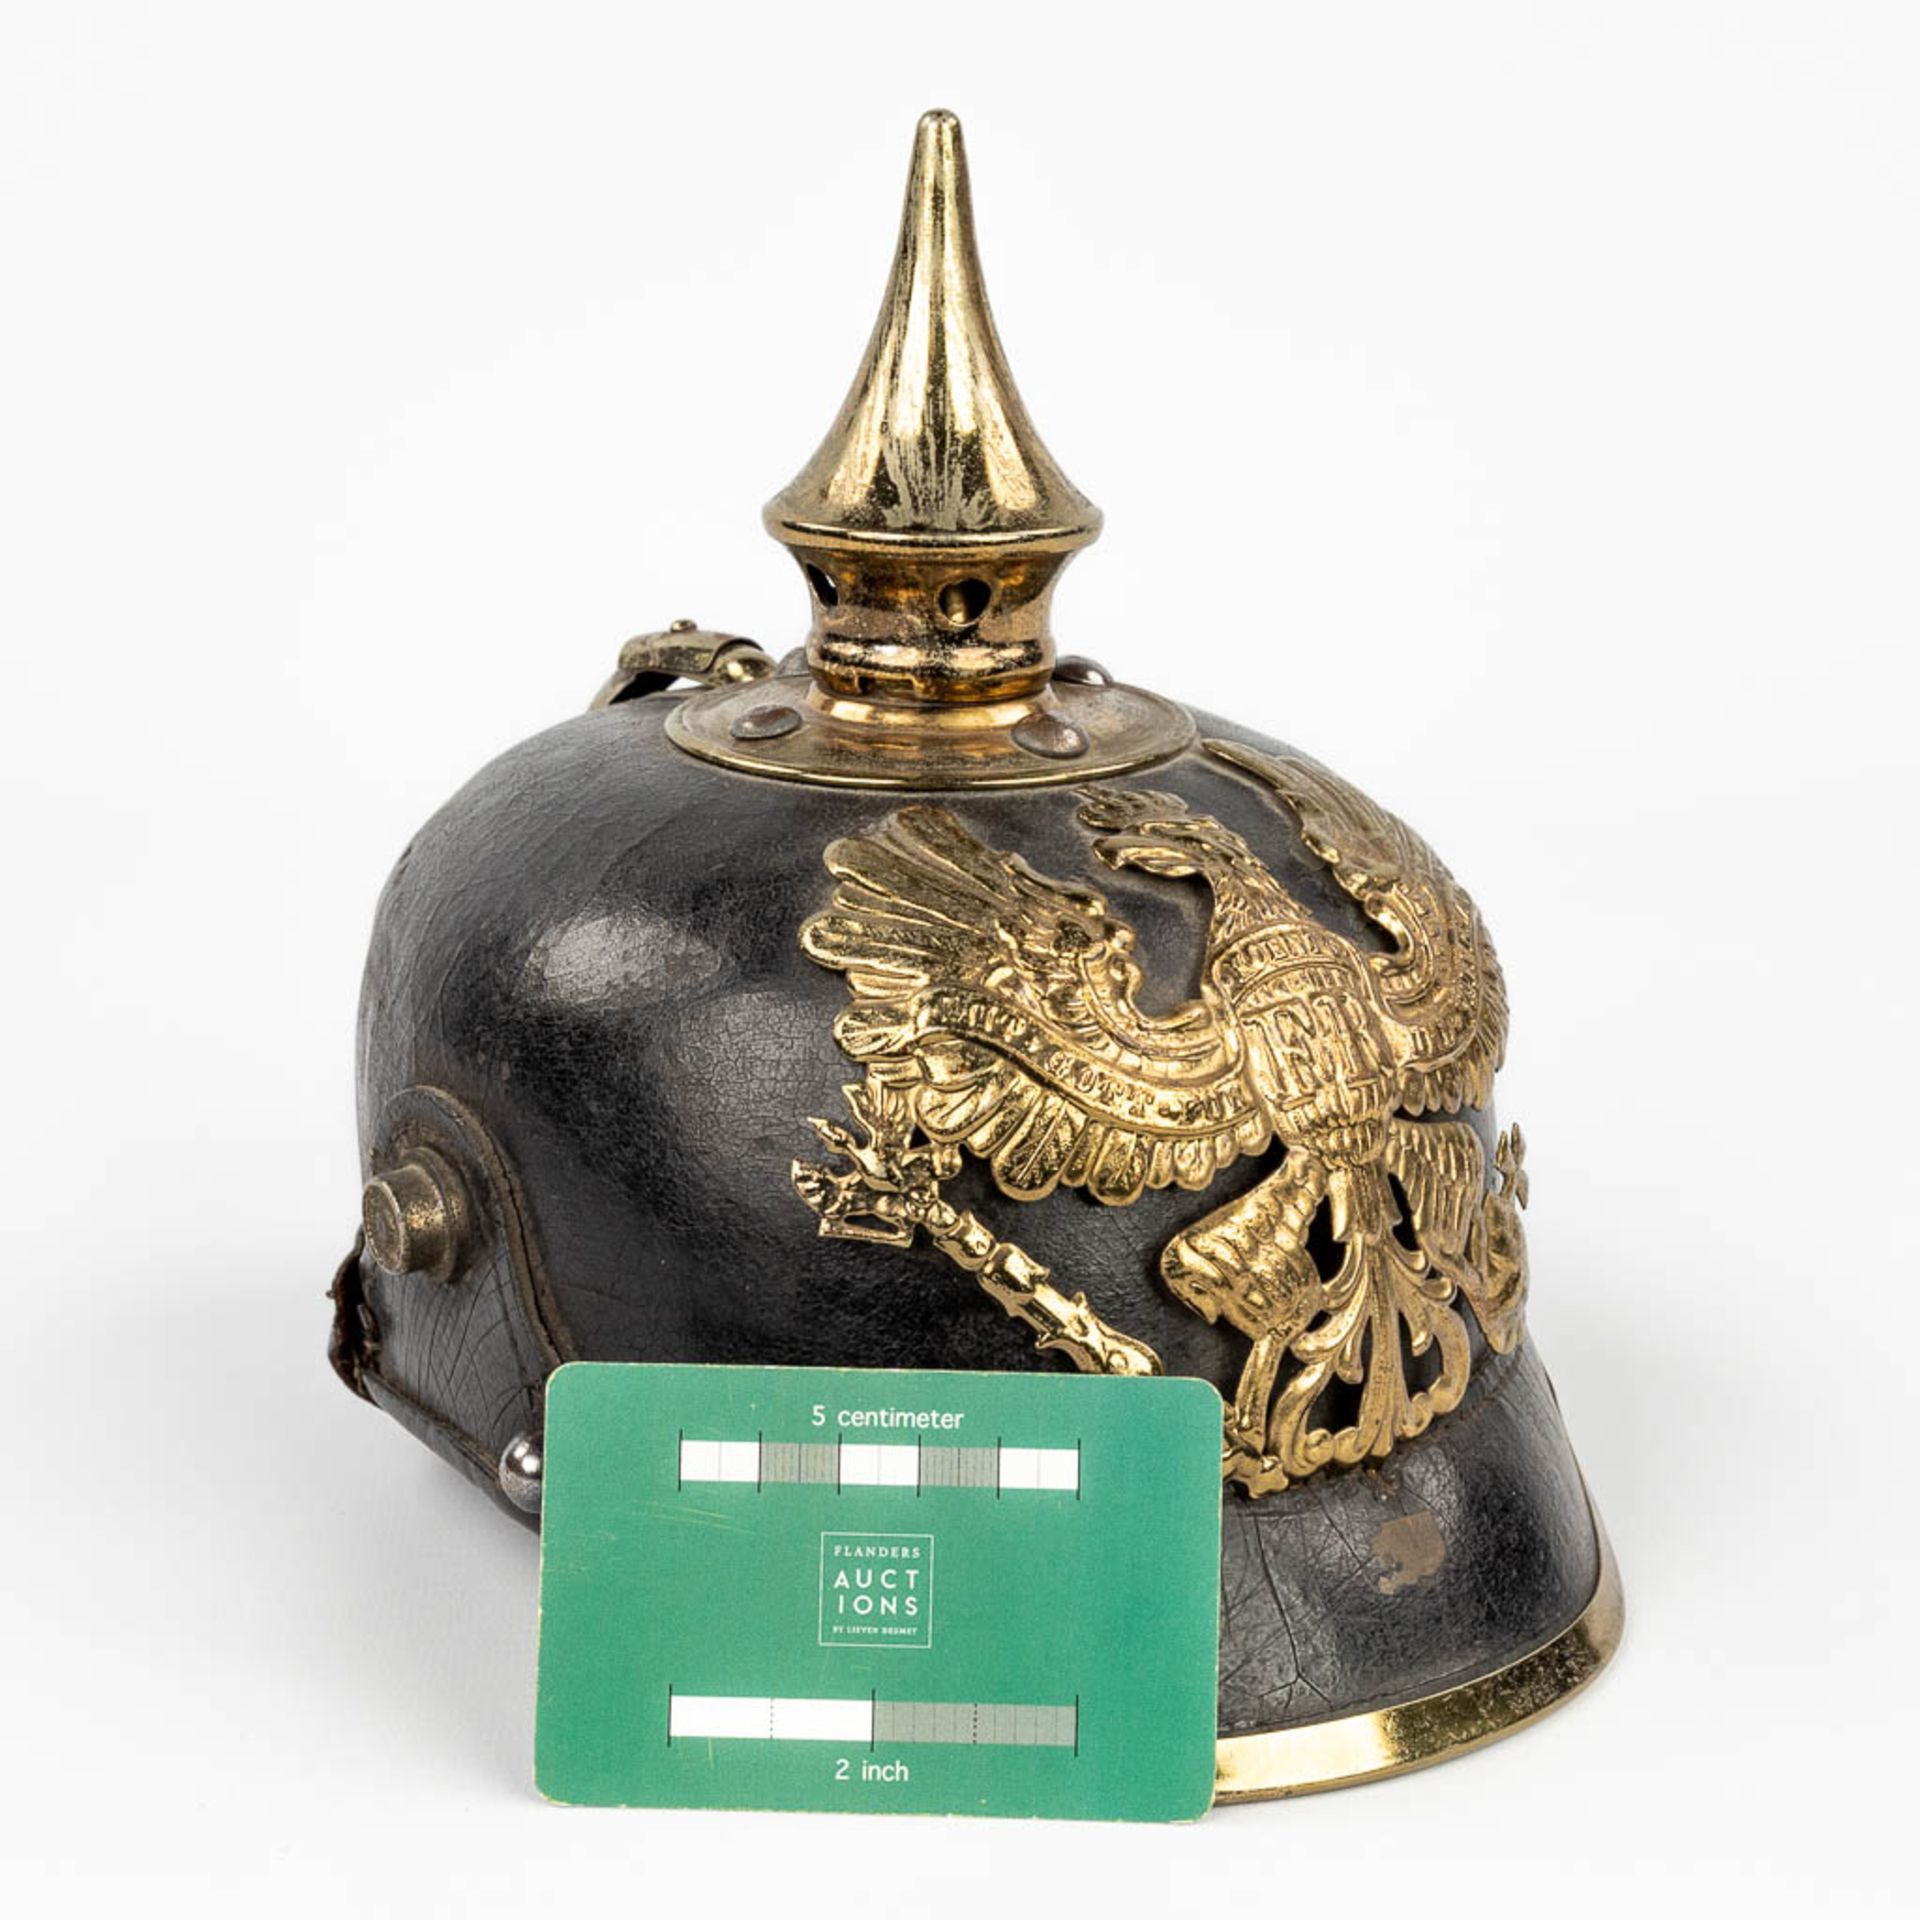 An antique German 'Pickelhaube' decorated with an eagle. Dating 1914-1918. (L:25 x W:18 x H:21 cm) - Bild 8 aus 17